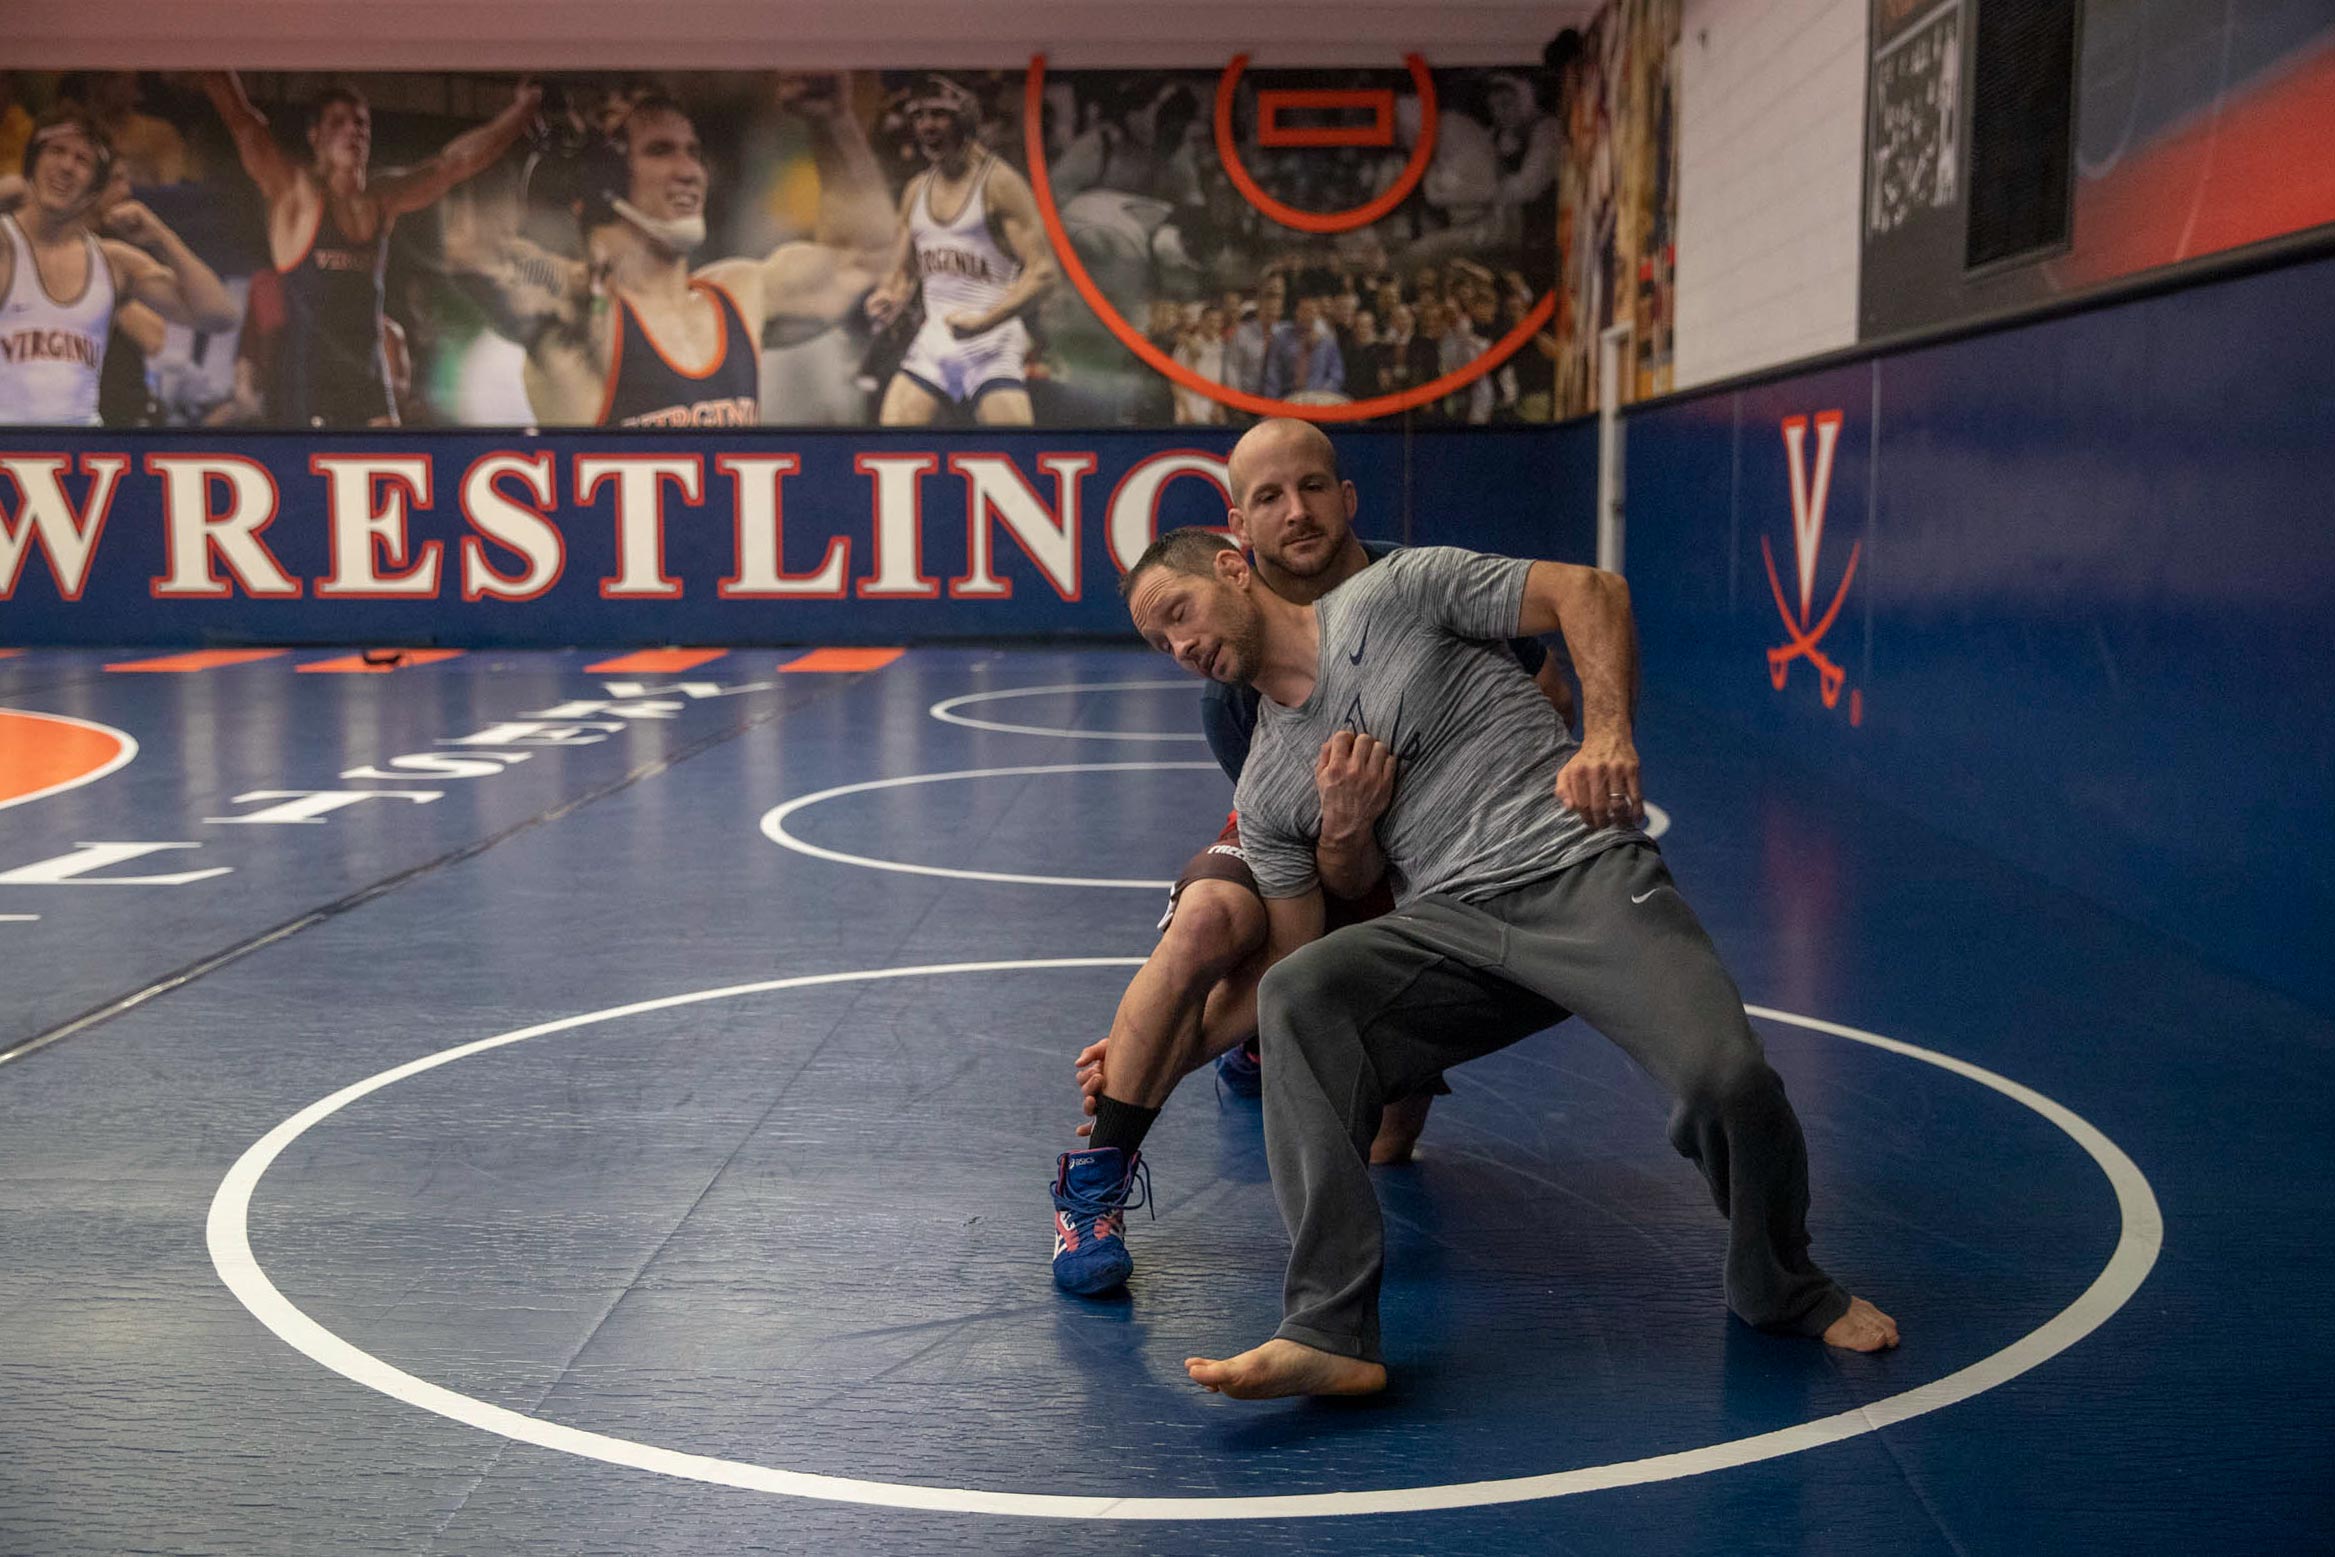 Steve Garland,front, and Trent Paulson, back, wrestle on a mat